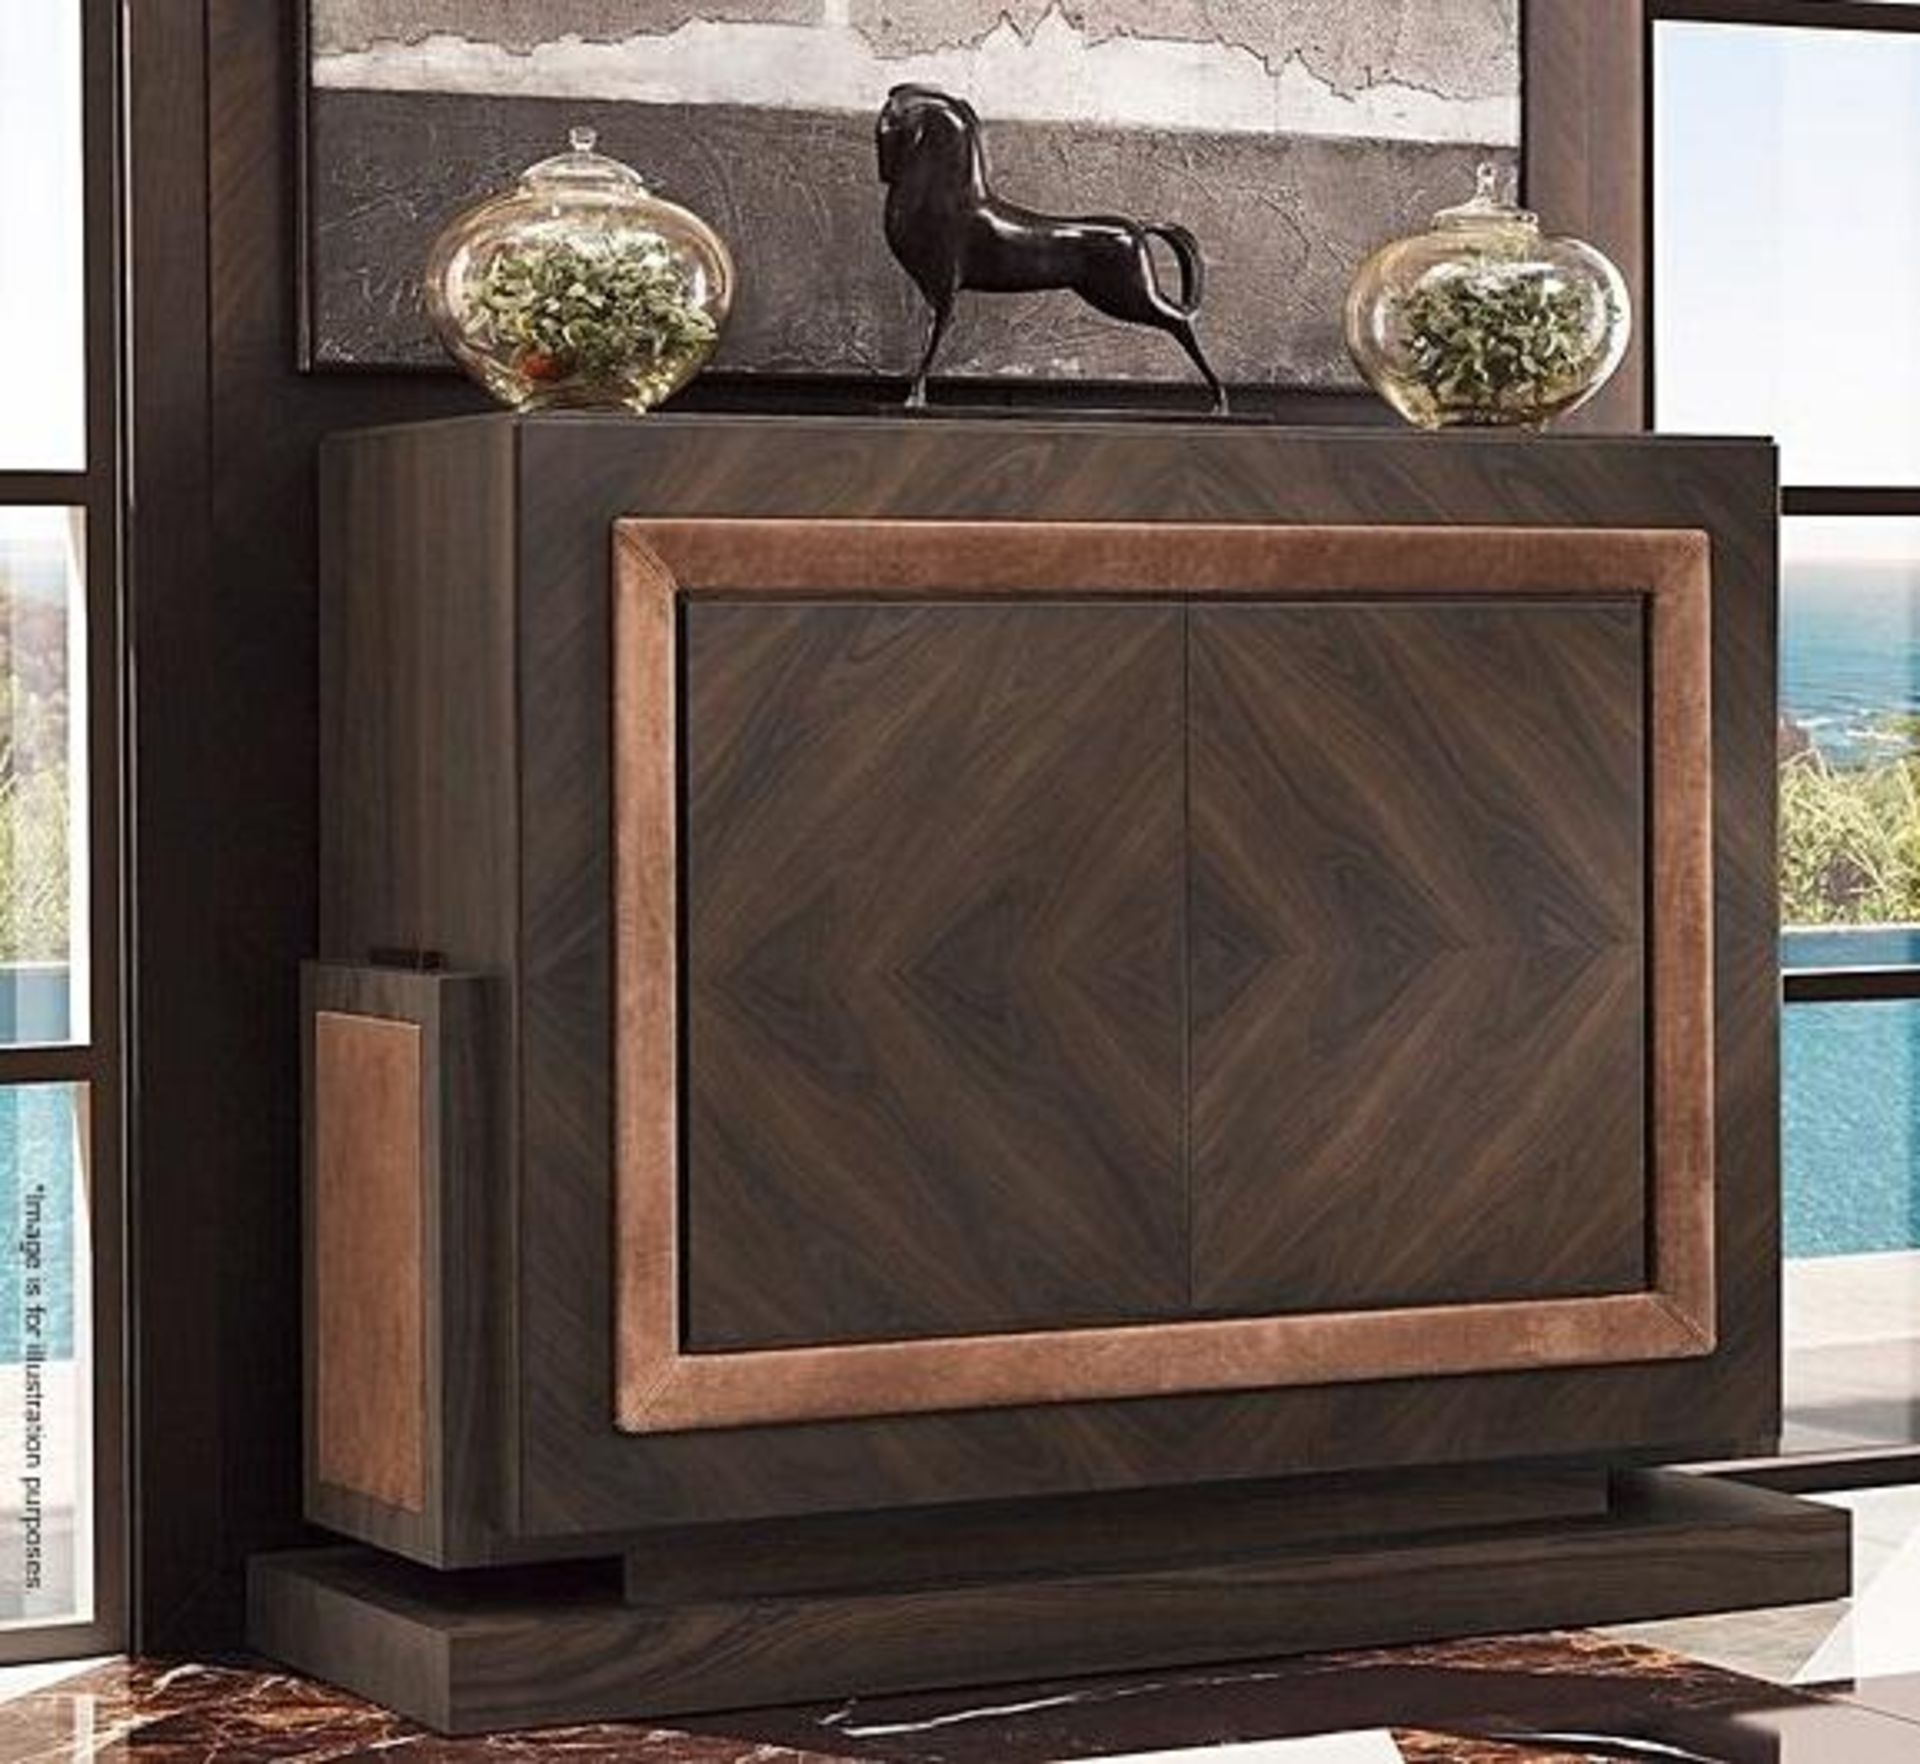 1 x SMANIA 'Efeso' Luxury Bar Unit In Burr Walnut With Leather Upholstery In 'Florida Beige'